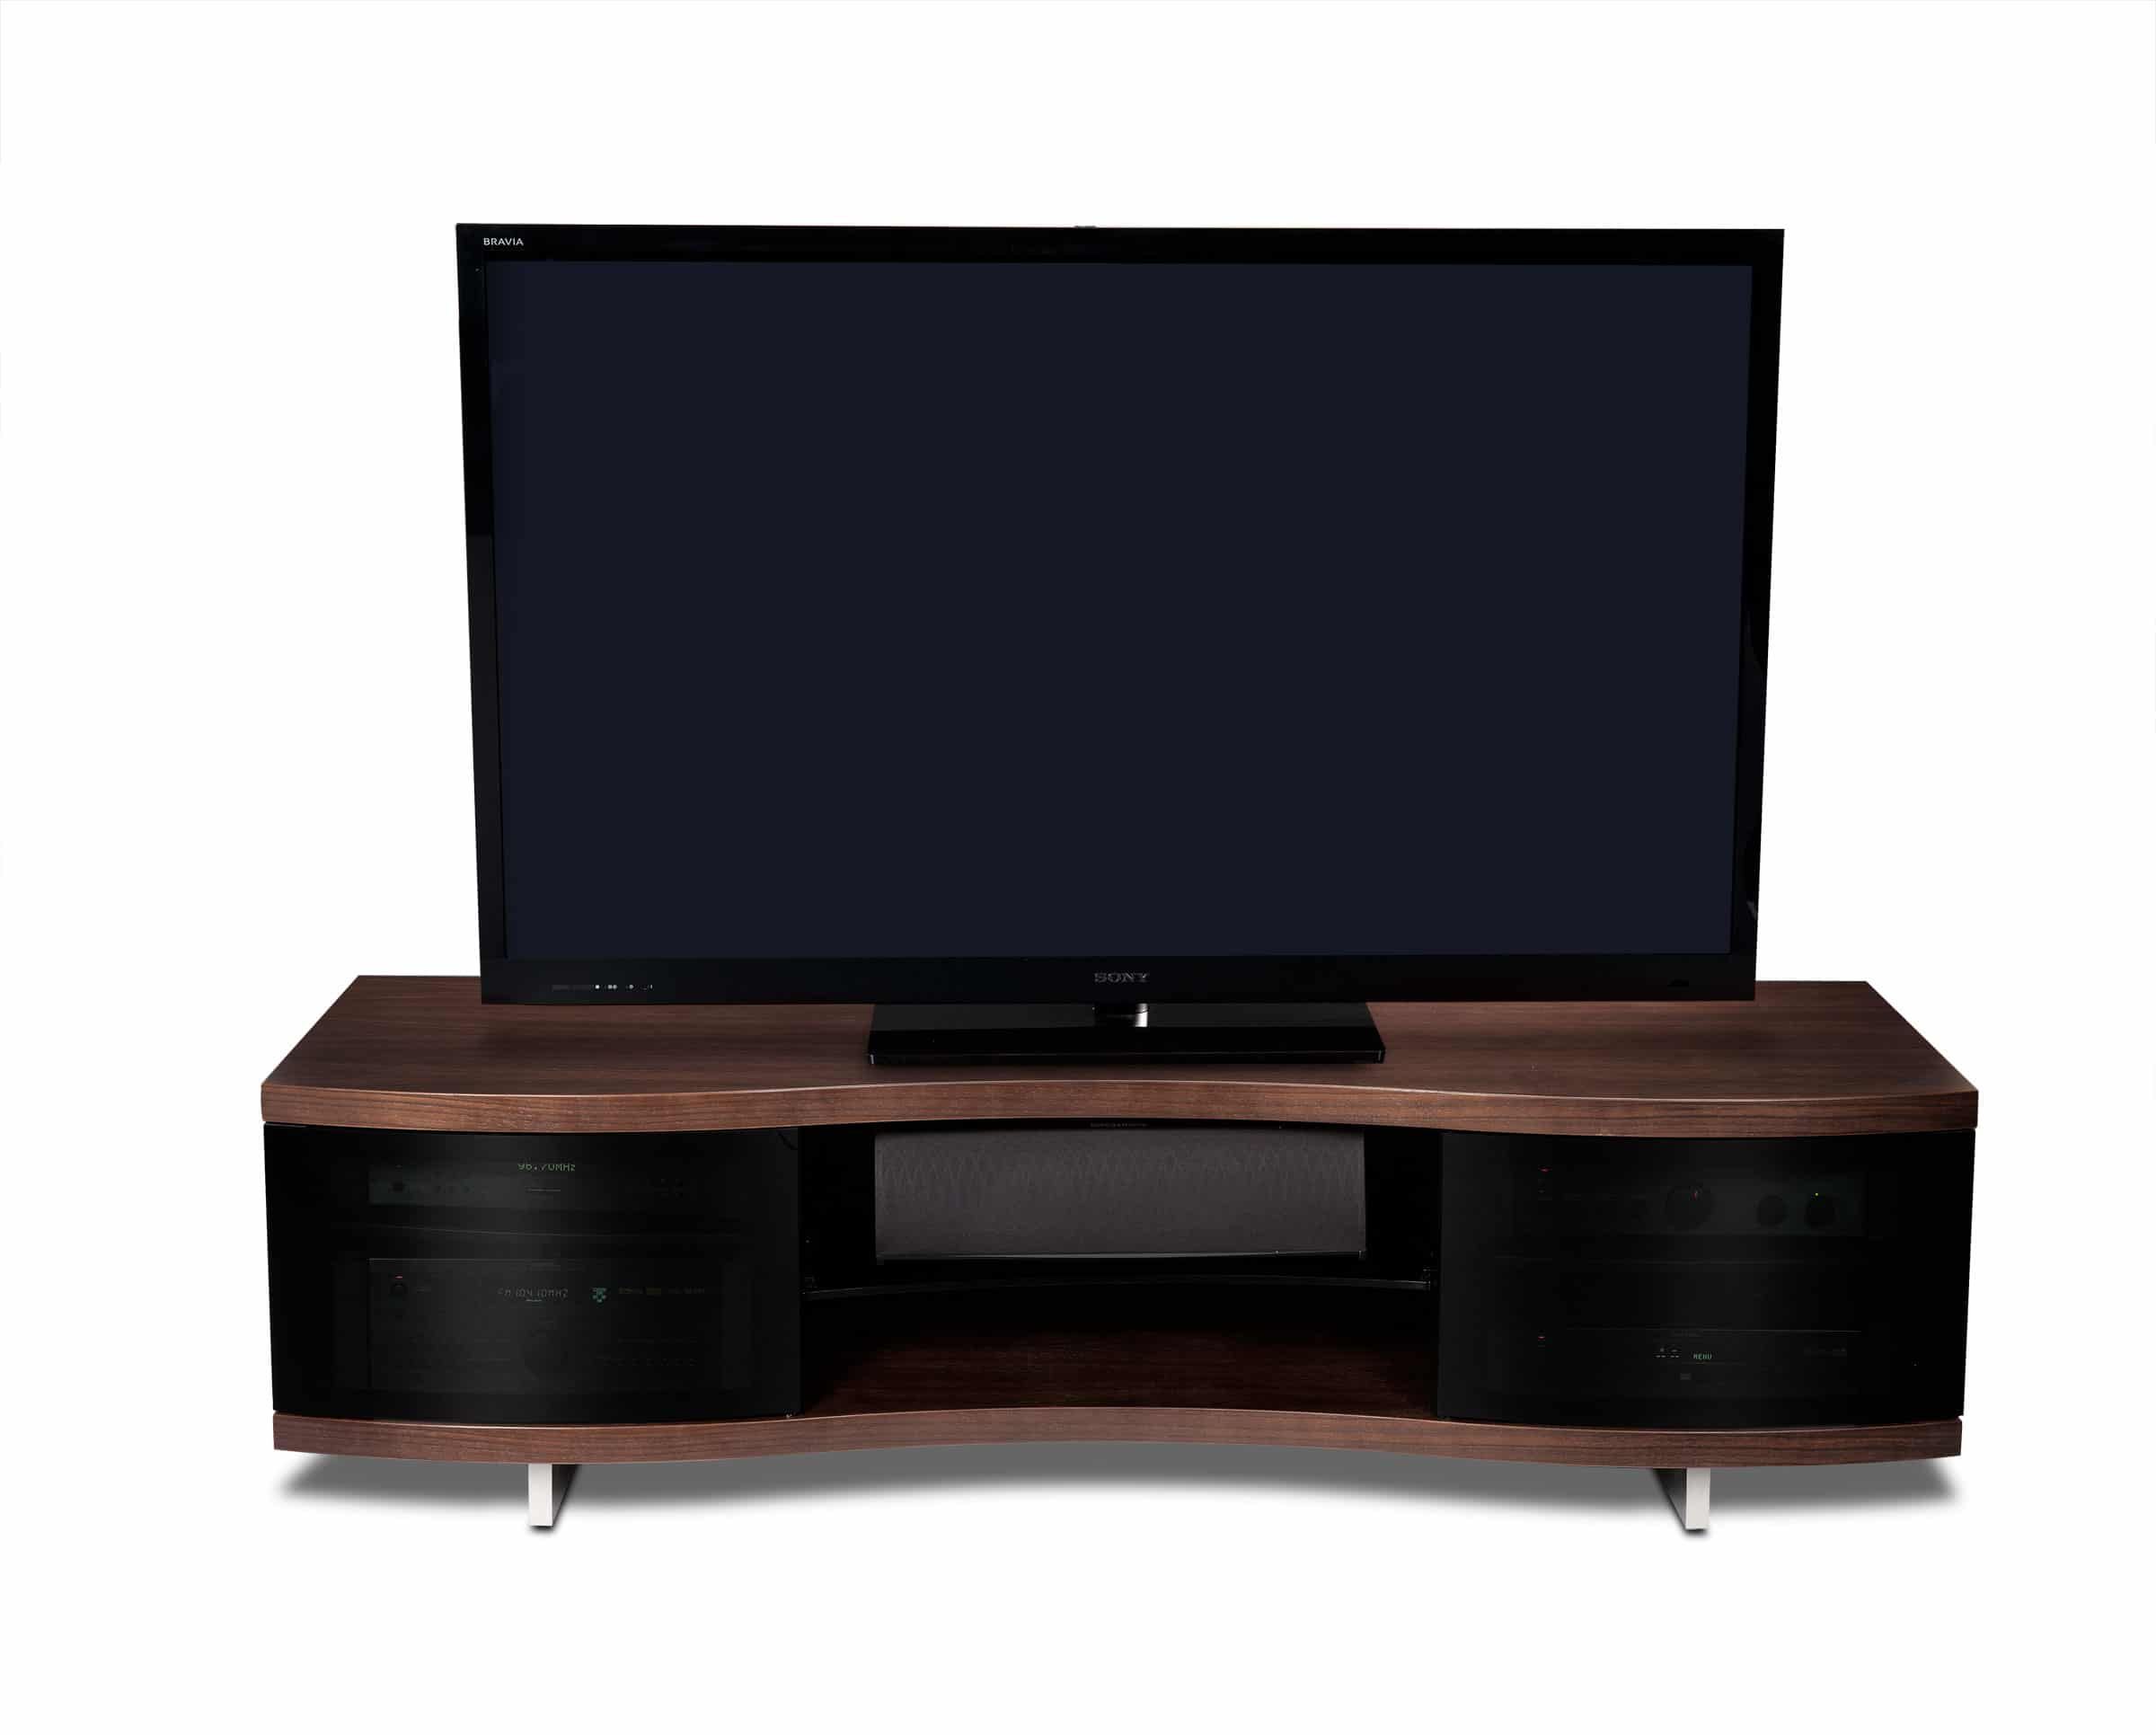 Ola 8137 Curved Tv Stand & Media Cabinet | Bdi Furniture Pertaining To Stylish Tv Cabinets (View 7 of 15)